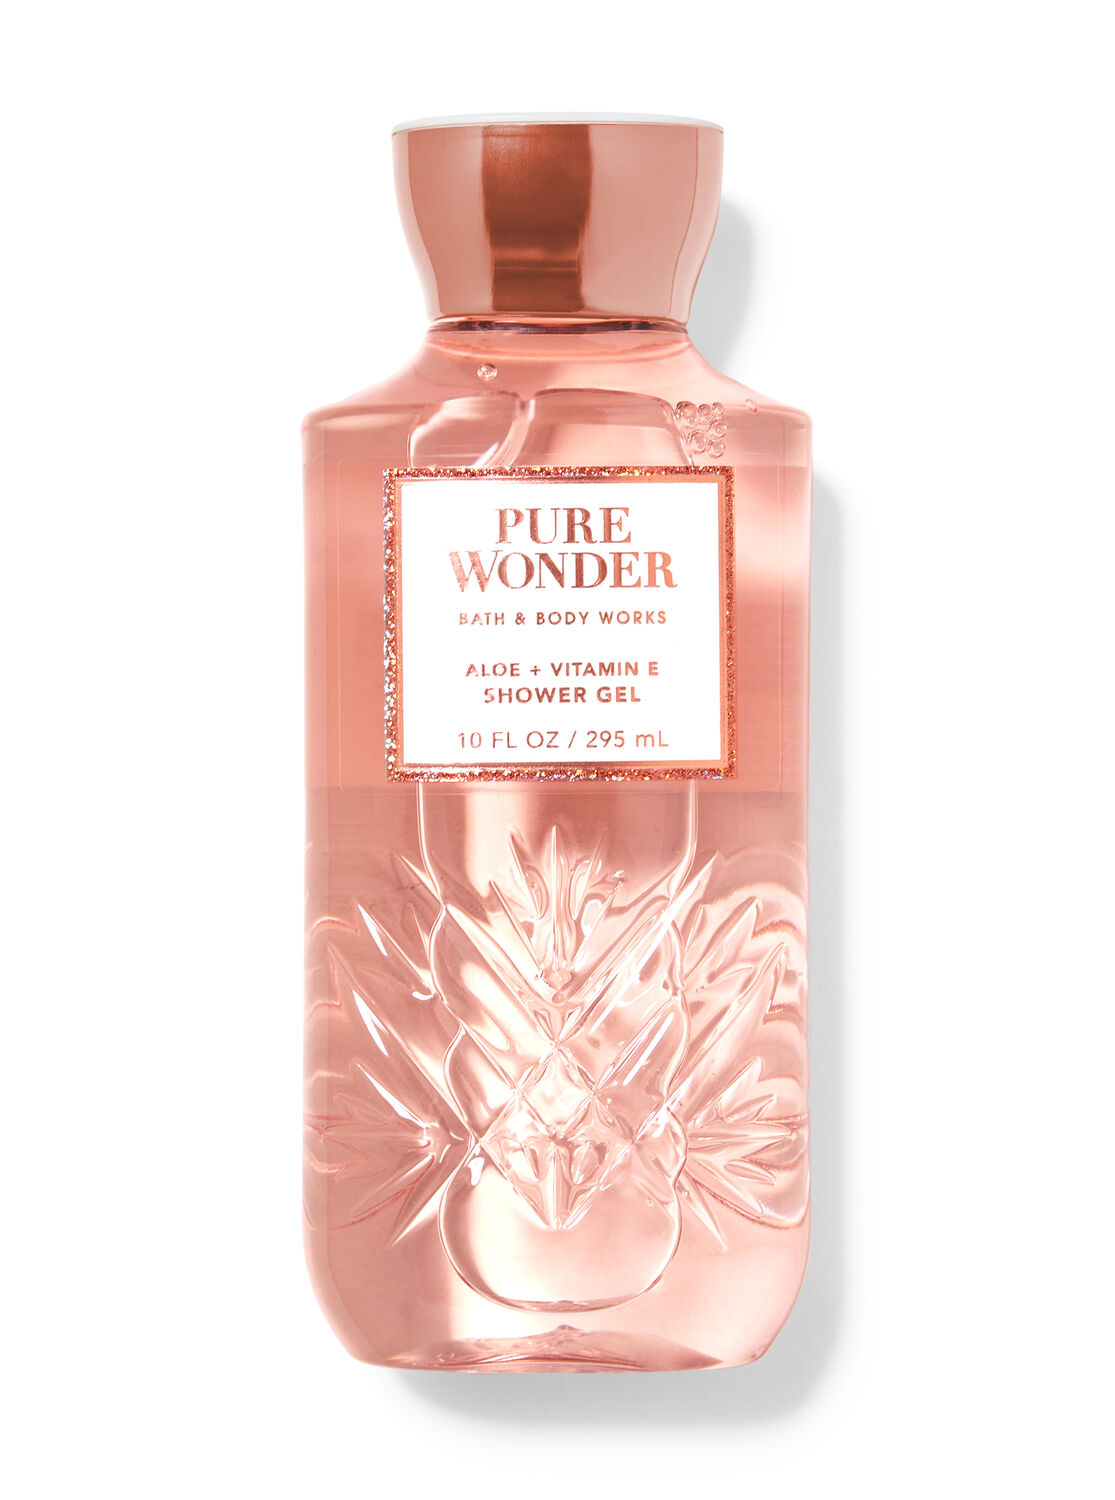 Wonder works and pure bath body partners.dugout.com :